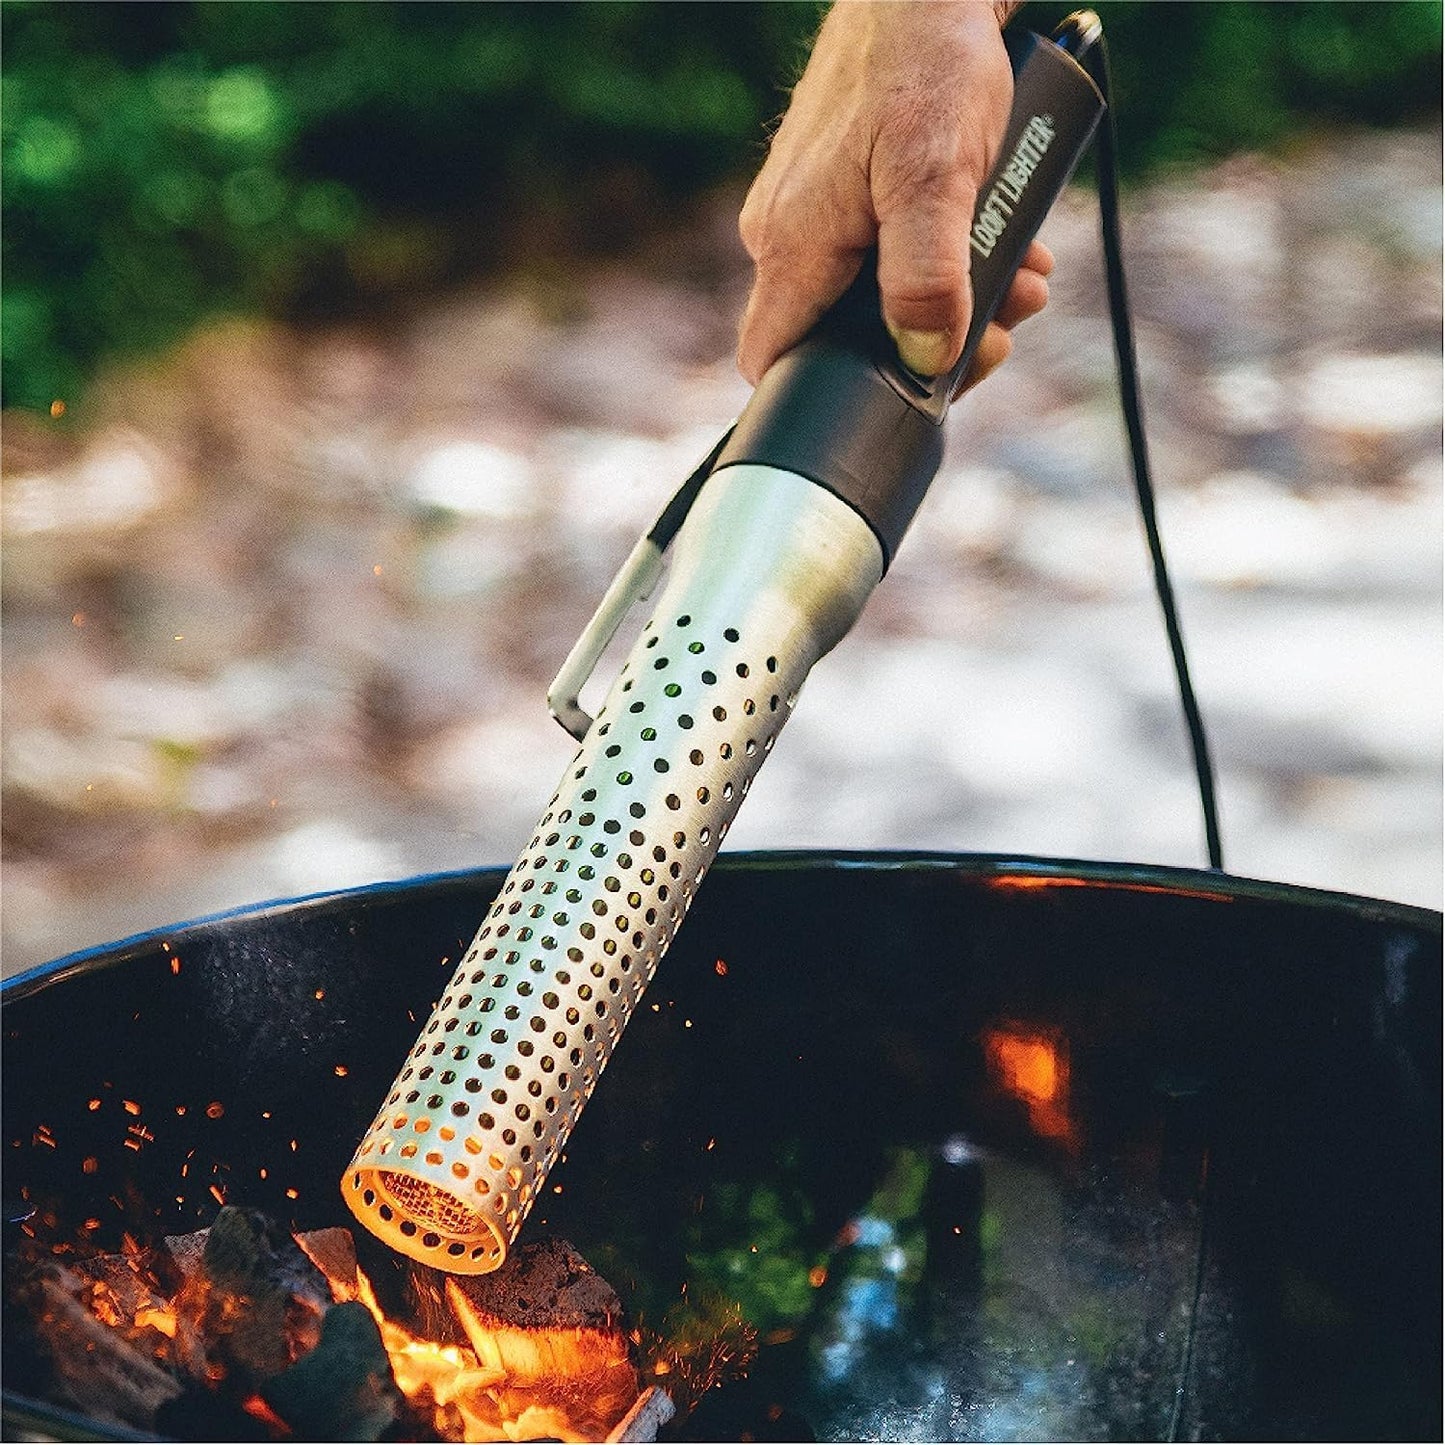 Looft Lighter 1 | All-Electric Charcoal Starter | Super Heated Air Reaches 1200°F in 60 Sec | Lights All Fuels: Briquettes, Fireplace Logs, and More